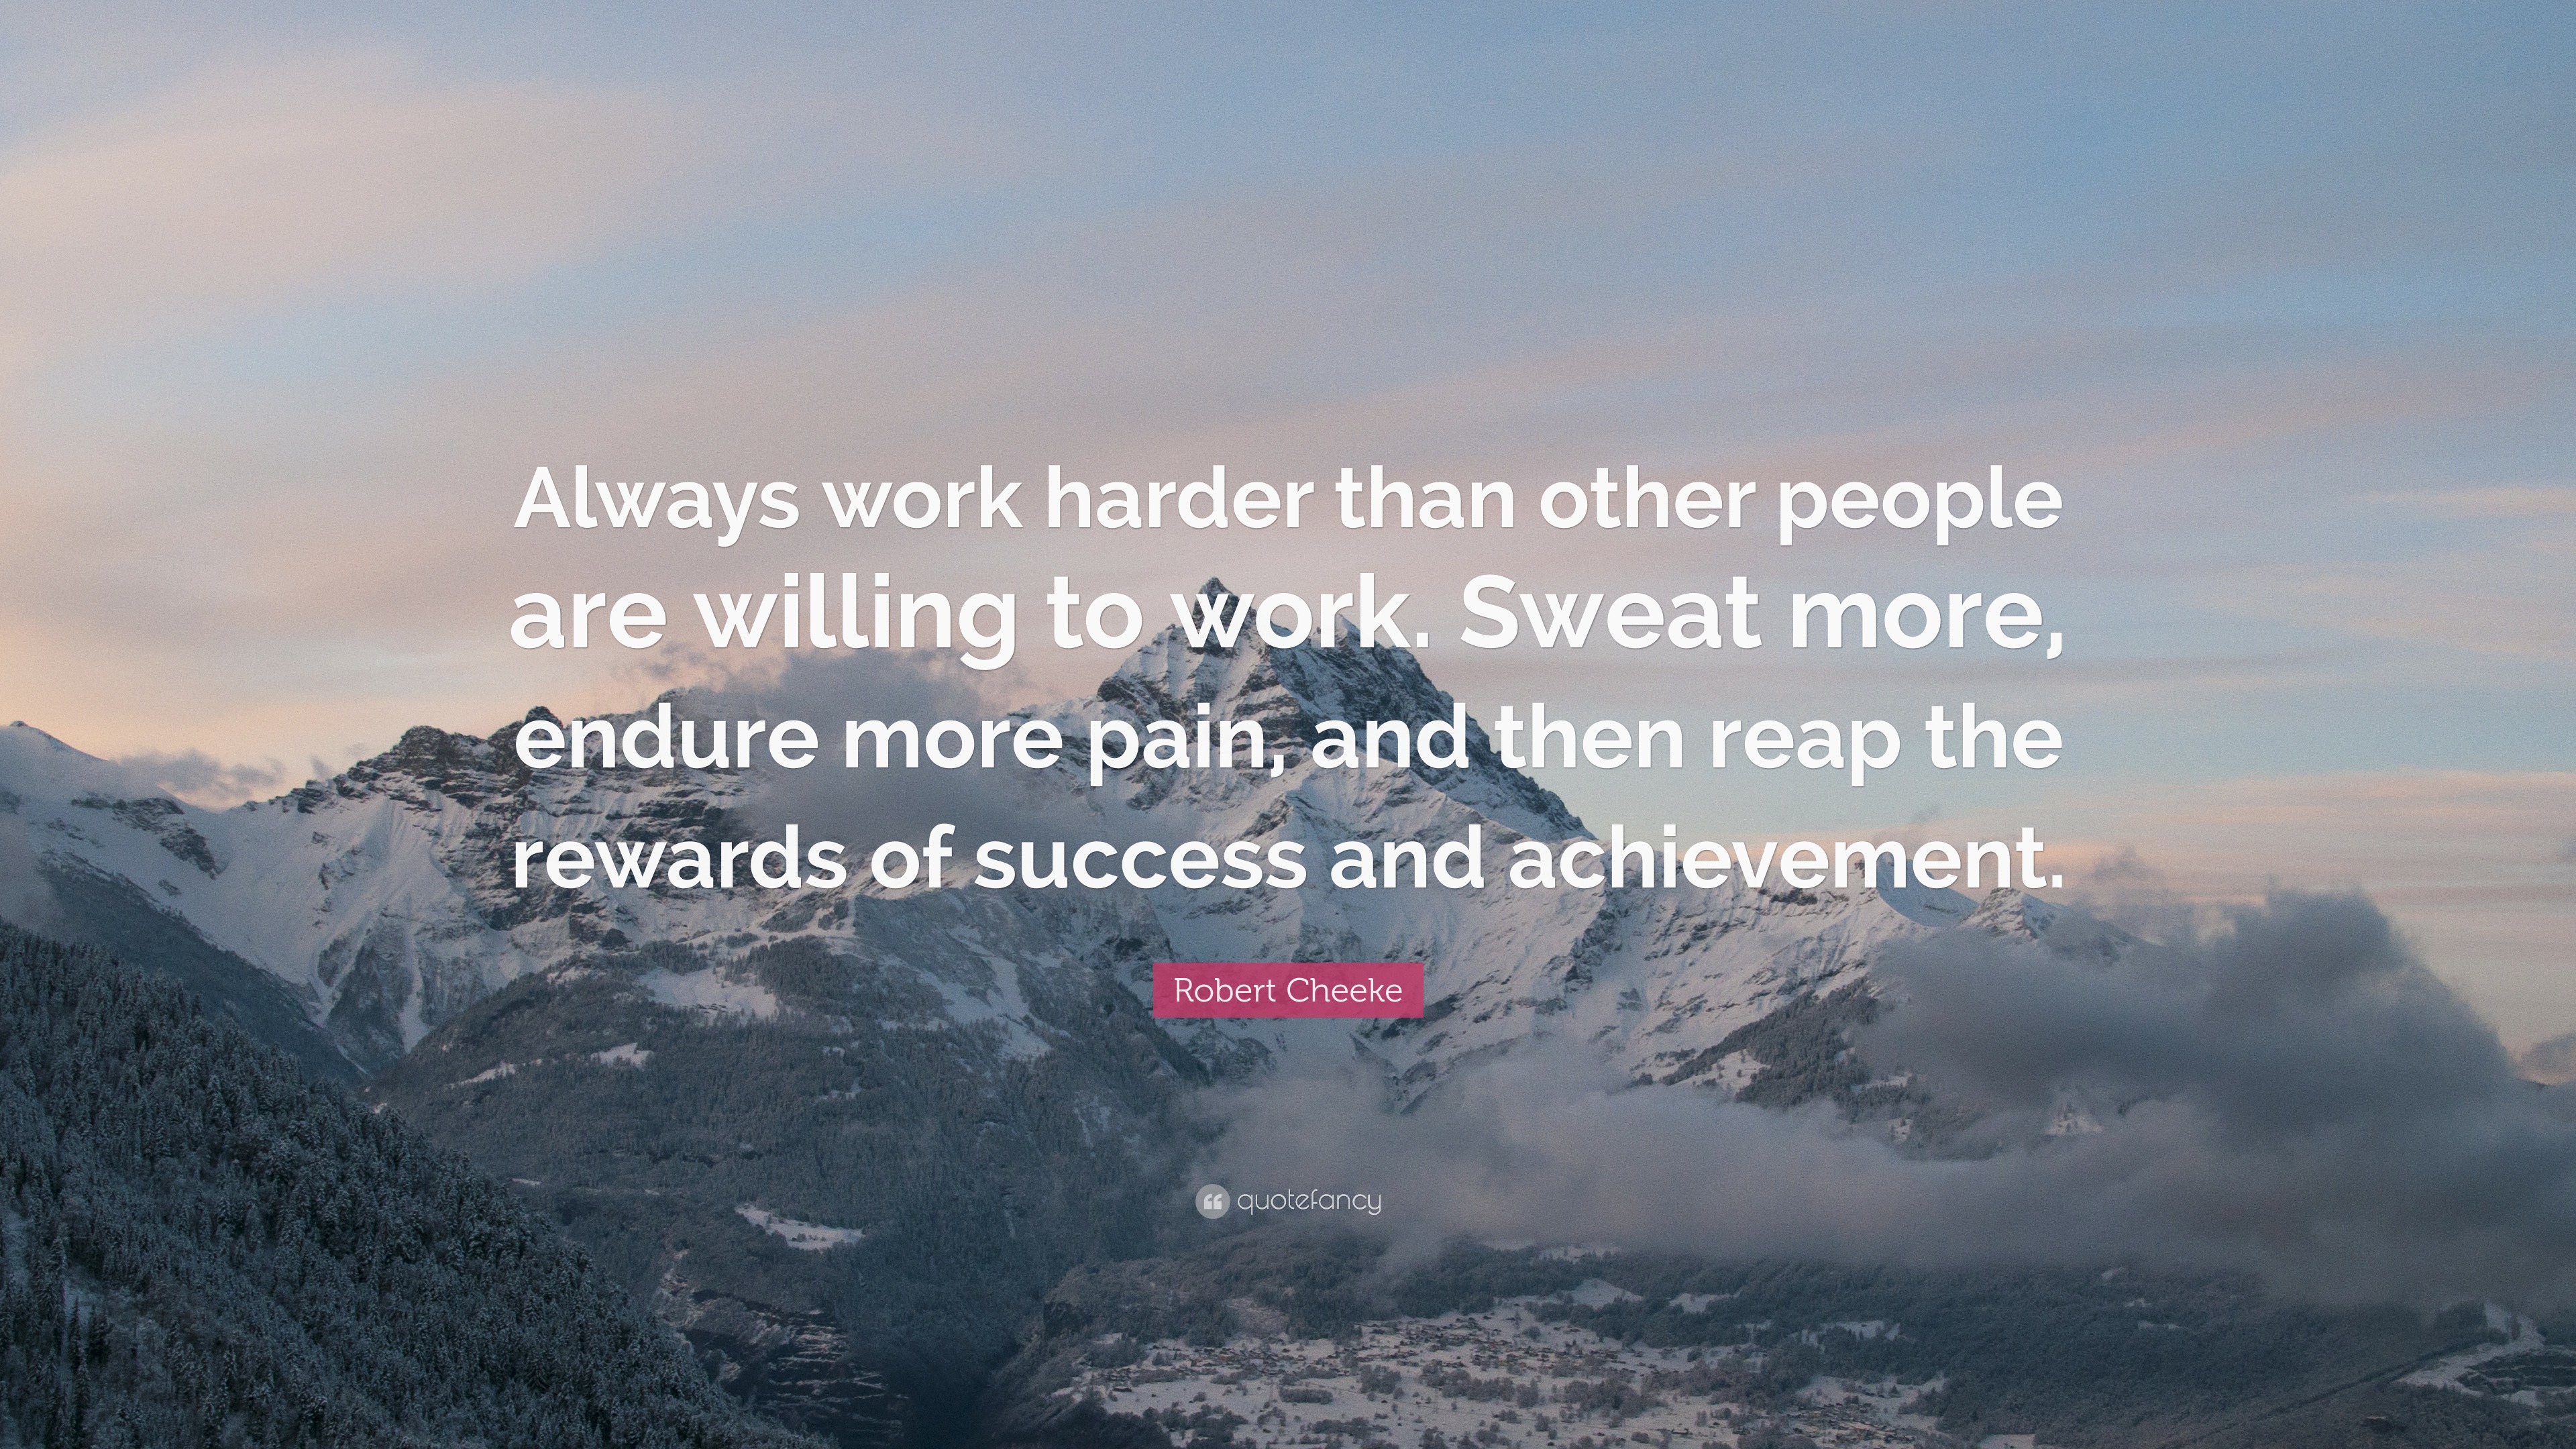 Robert Cheeke Quote: “Always work harder than other people are willing ...